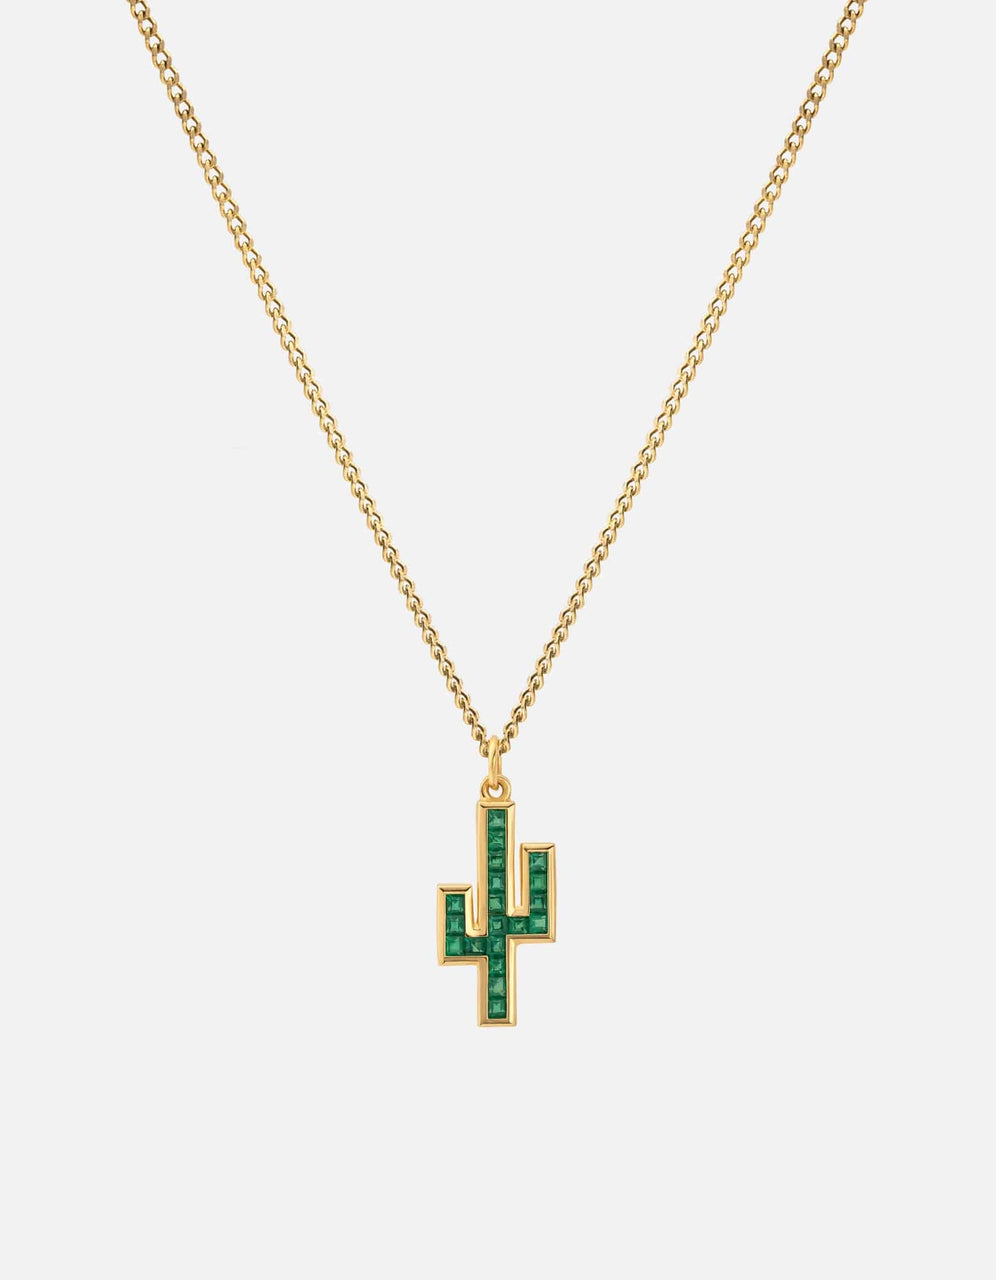 Miansai Cactus Green Onyx Pendant Necklace in Gold Vermeil, 24 in.